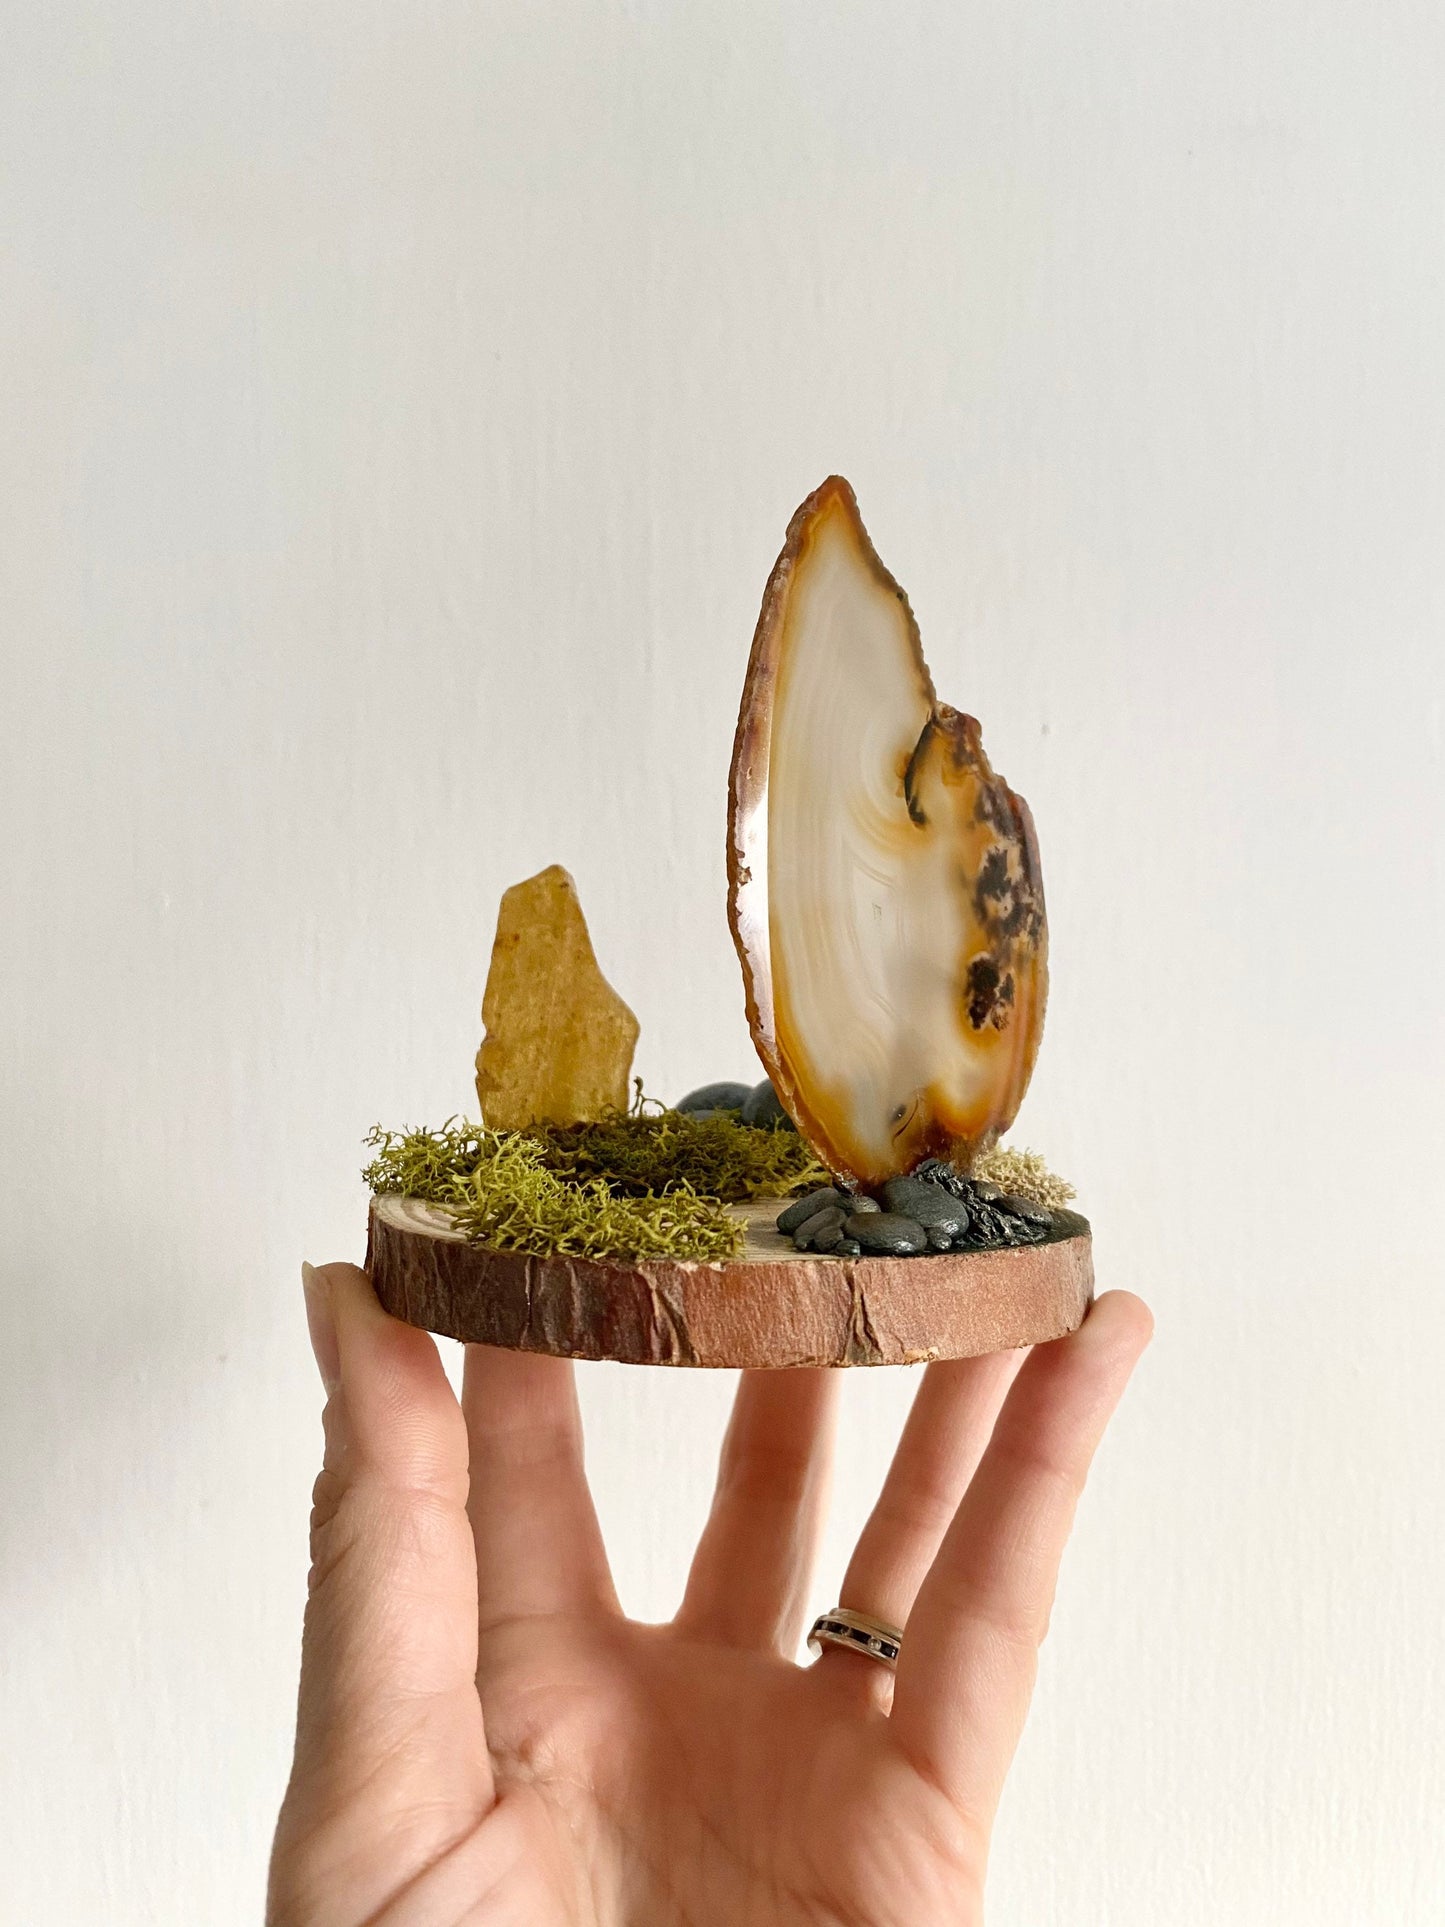 SACRED PORTAL ~ Stone and Moss Sculpture Home Decor:  Agate and Amber Hand sculpted Portal